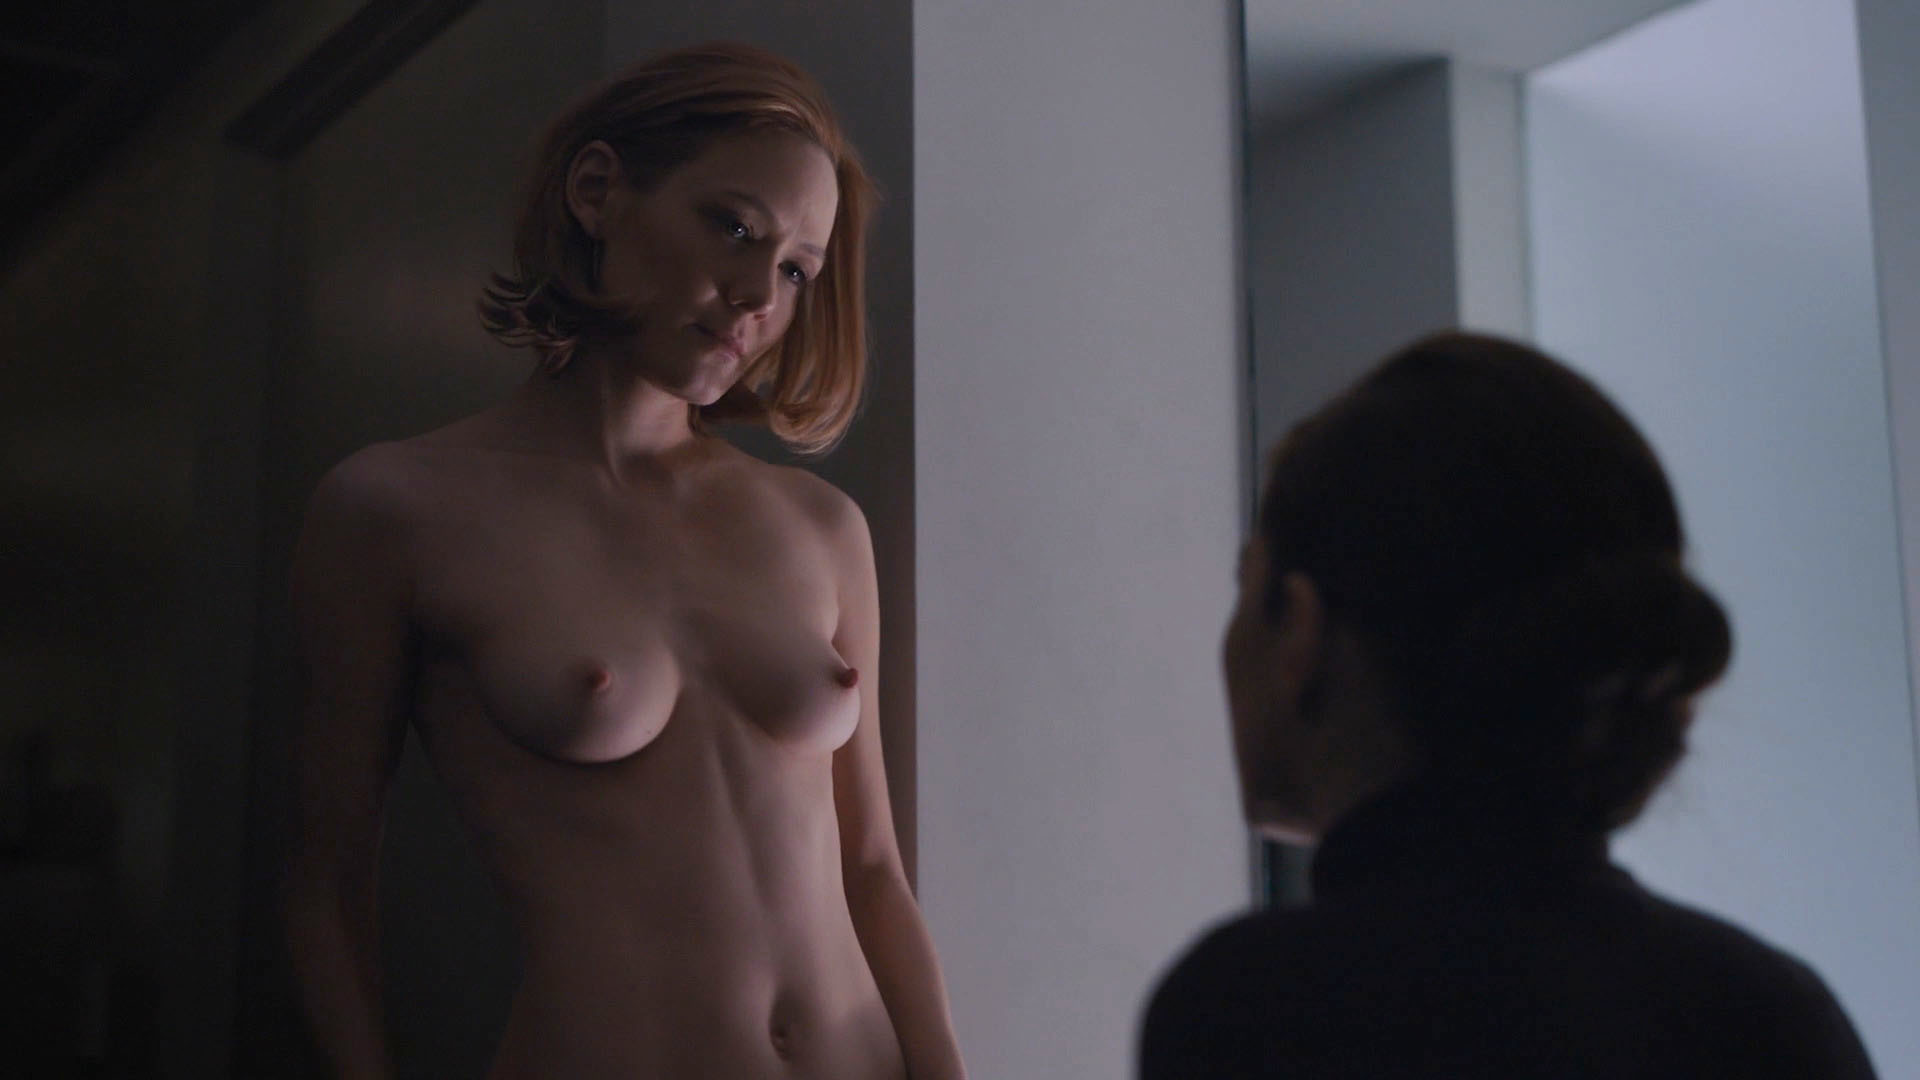 Naked Anna Friel In The Girlfriend Experience Ii